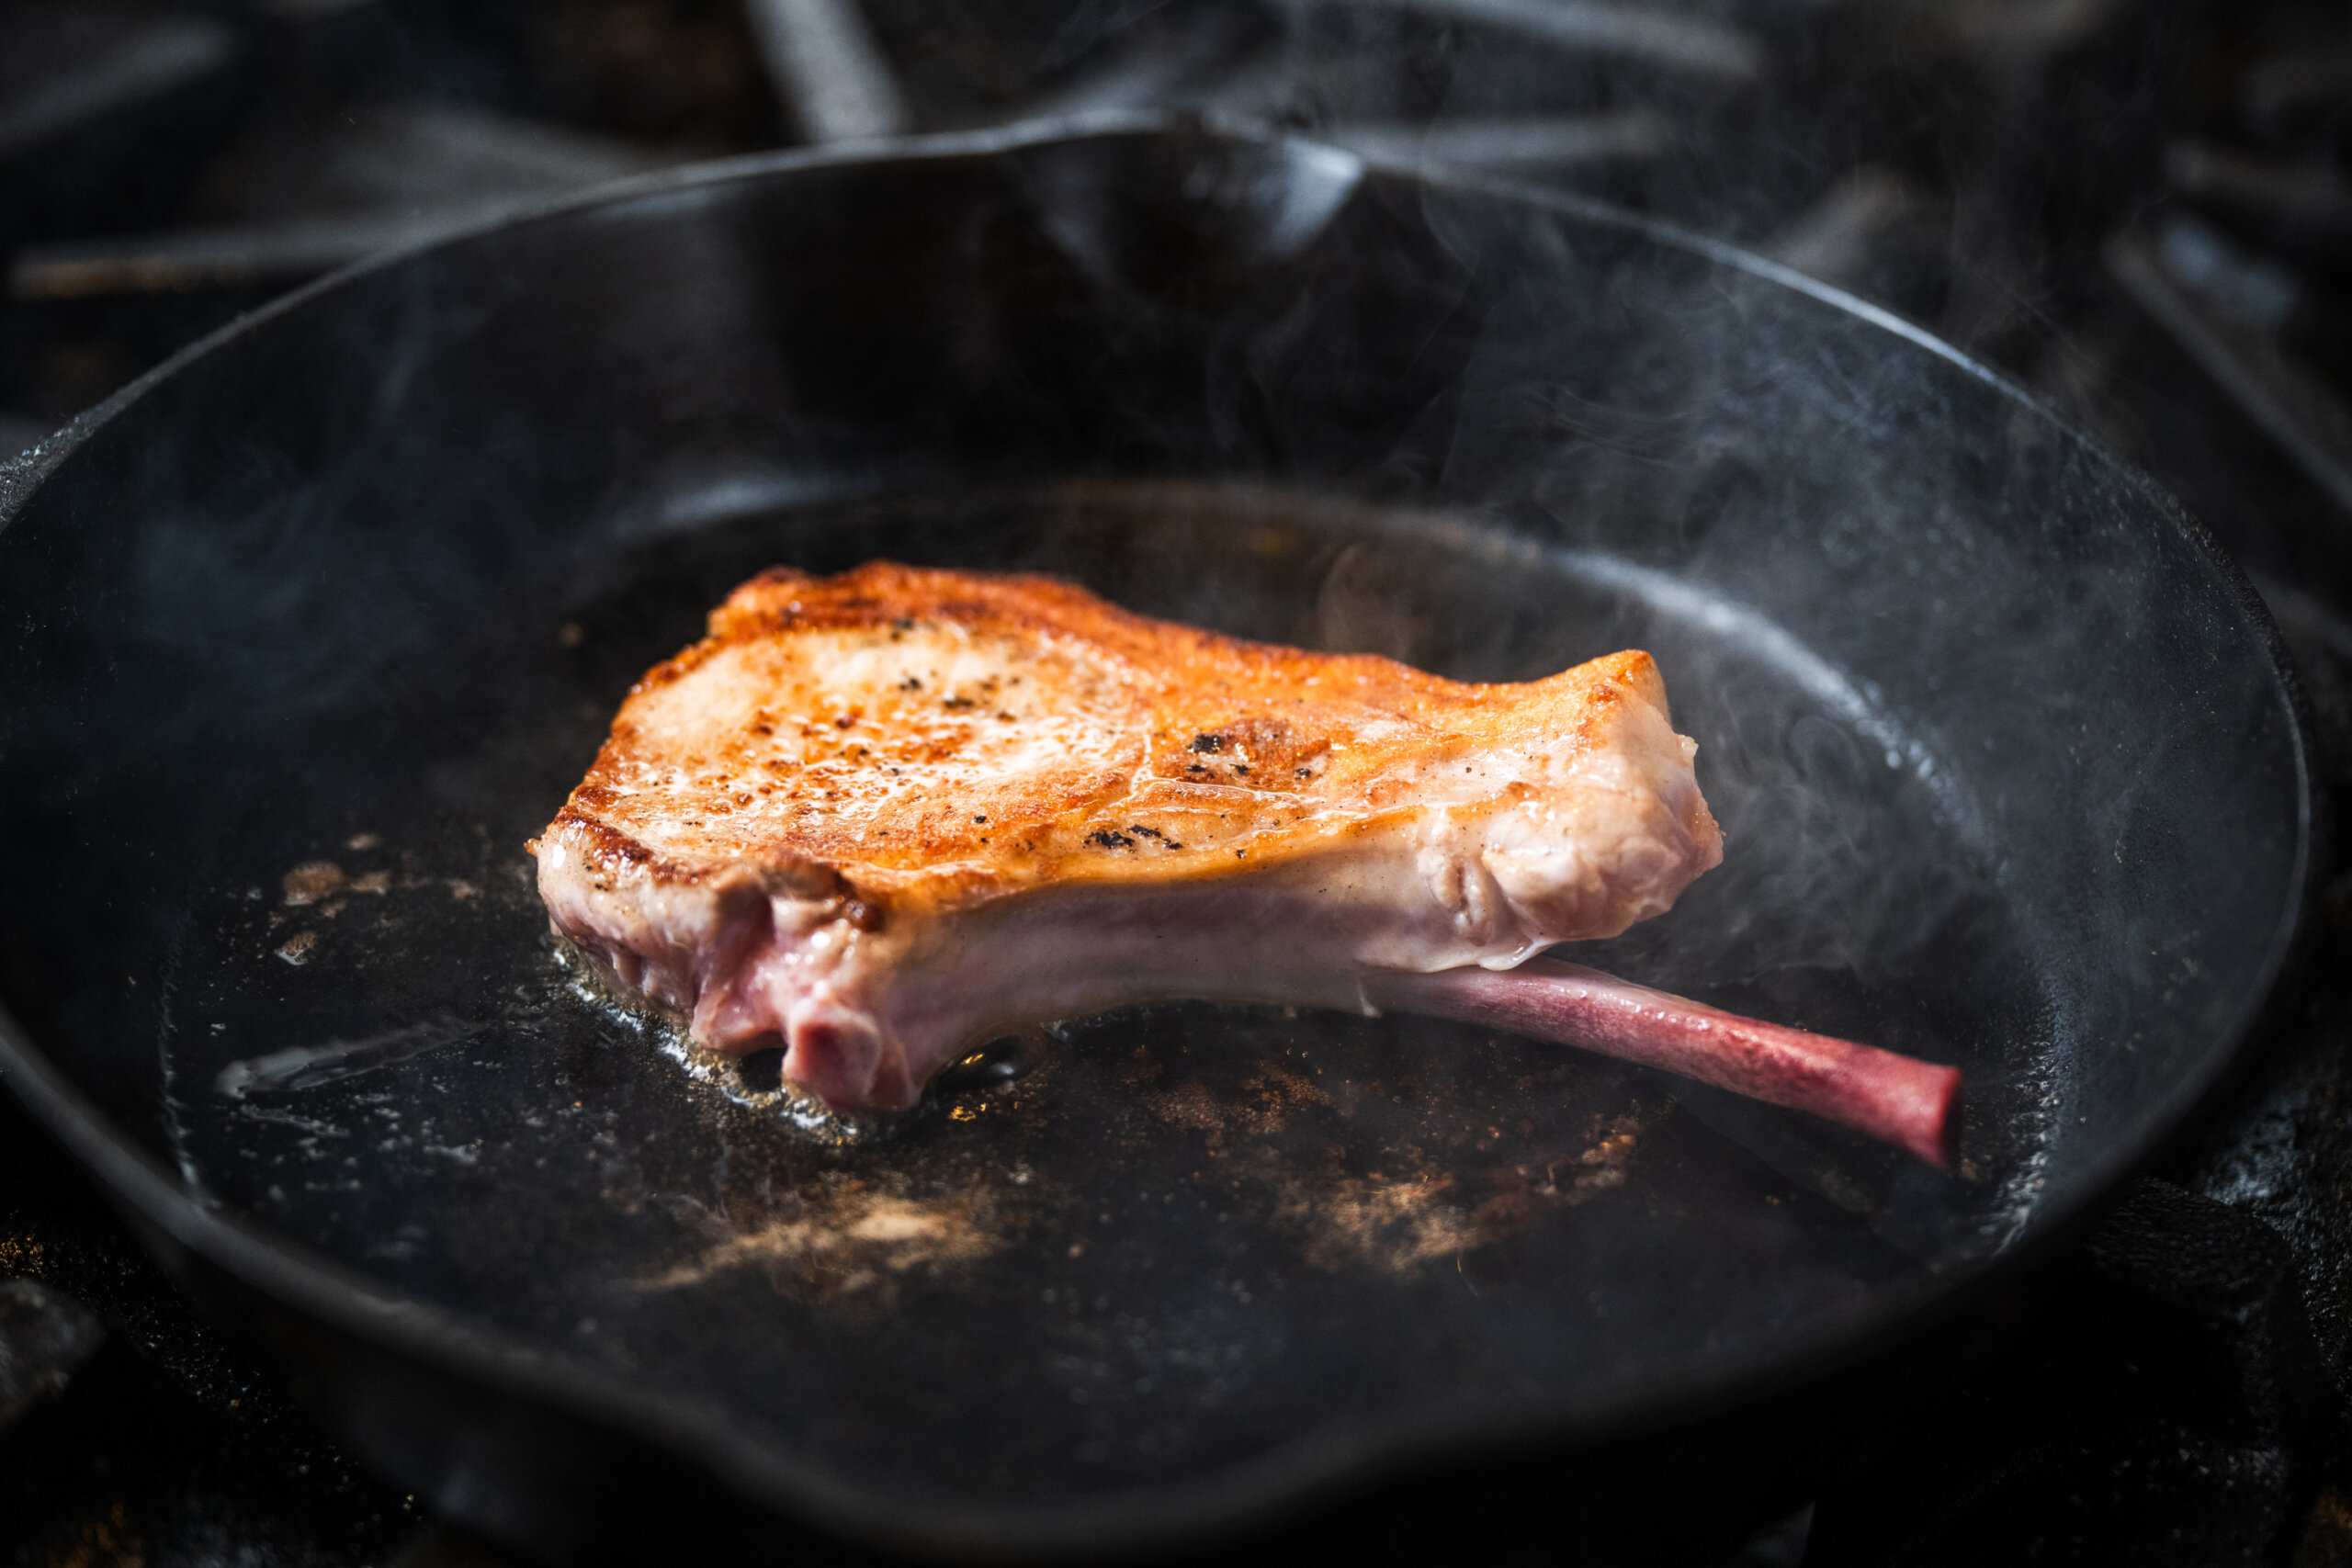 The bone-in chop is first seared in a hot skillet